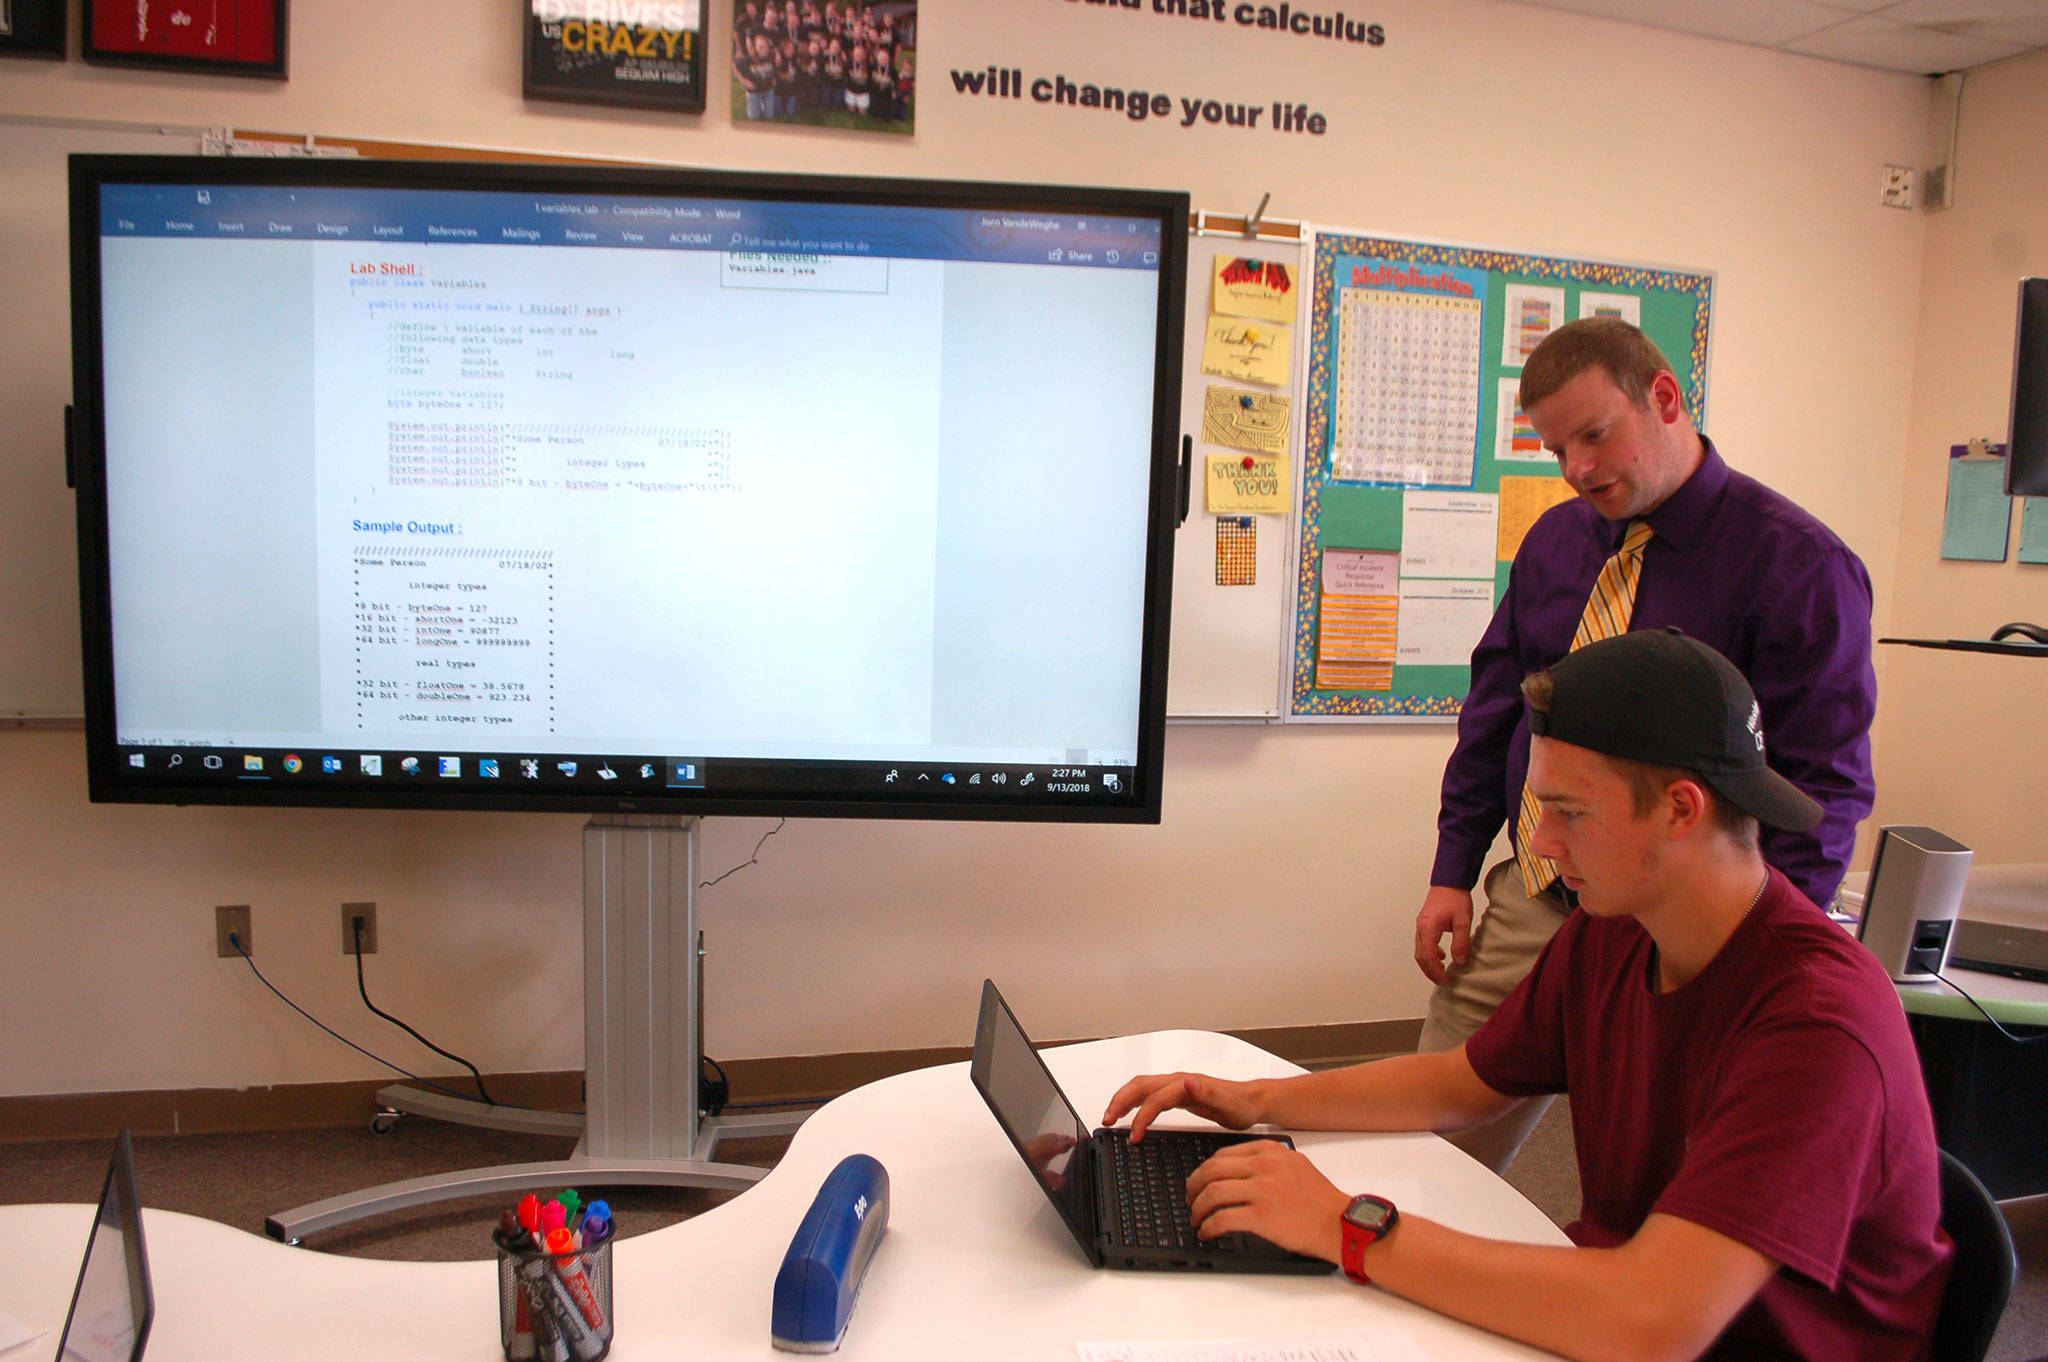 Teacher Jorn VandeWeghe helps Jordan Hurdlow, and advanced placement computer science student, during a variables lab on Sept. 13 at Sequim High School. AP computer science is a new course offered at the high school this year after the district received a grant in May to purchase technology to teach the course and acquiring curriculum to create a K-12 computer science pathway. VandeWeghe said his students focus on problem-solving, creativity, and using and creating technology in writing applications that solve human problems. Students take an AP exam later in the year when they can earn college or course credit. Sequim Gazette photo by Erin Hawkins